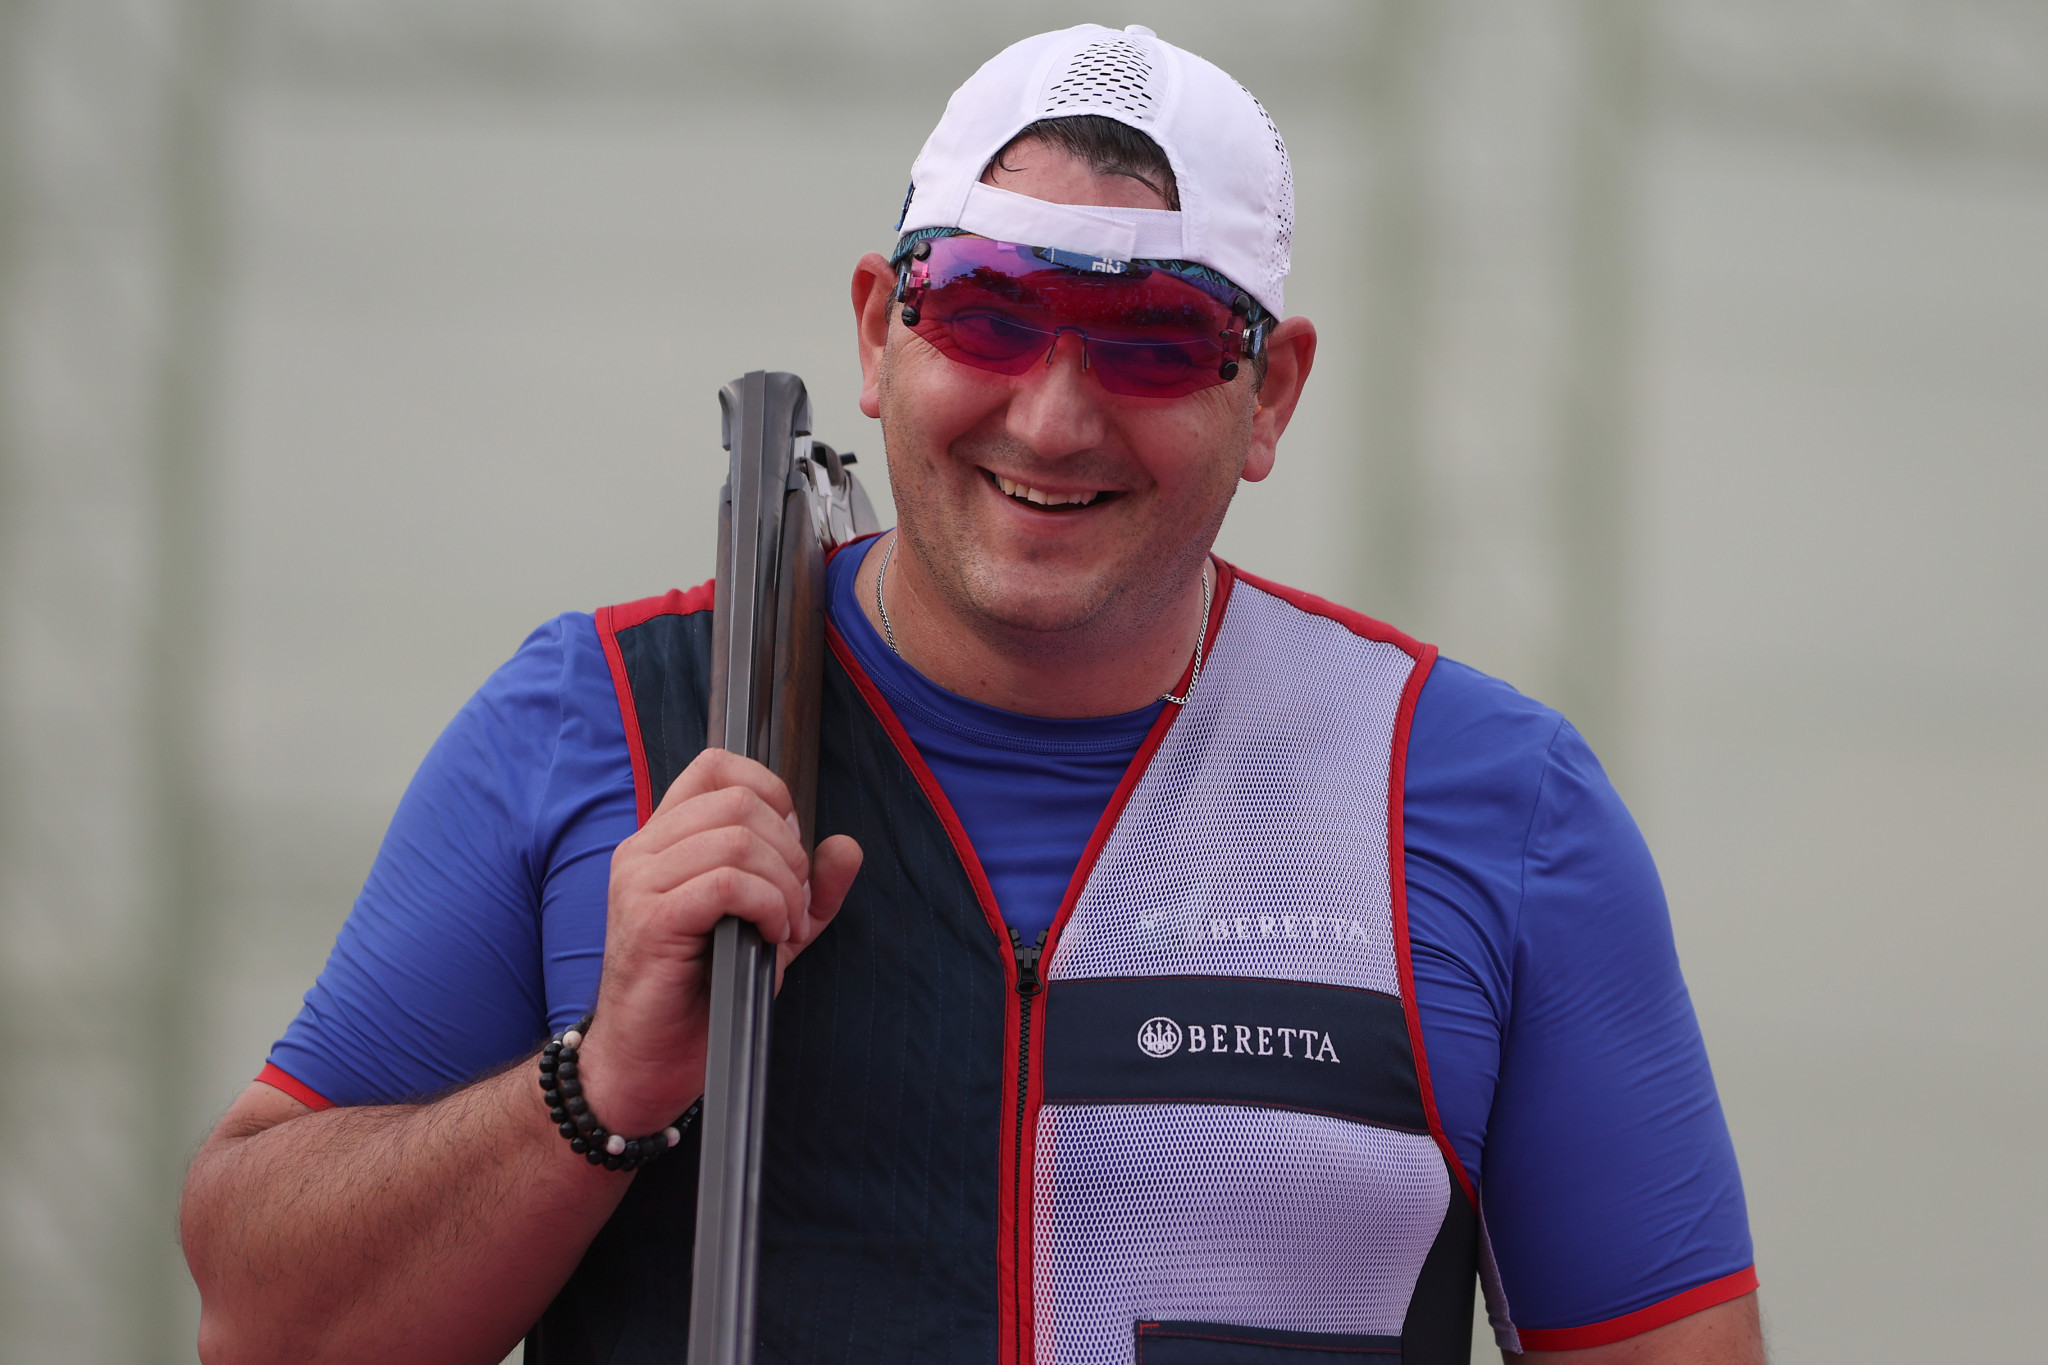 Jiří Lipták won the men's trap gold today at the ISSF World Cup ©Getty Images